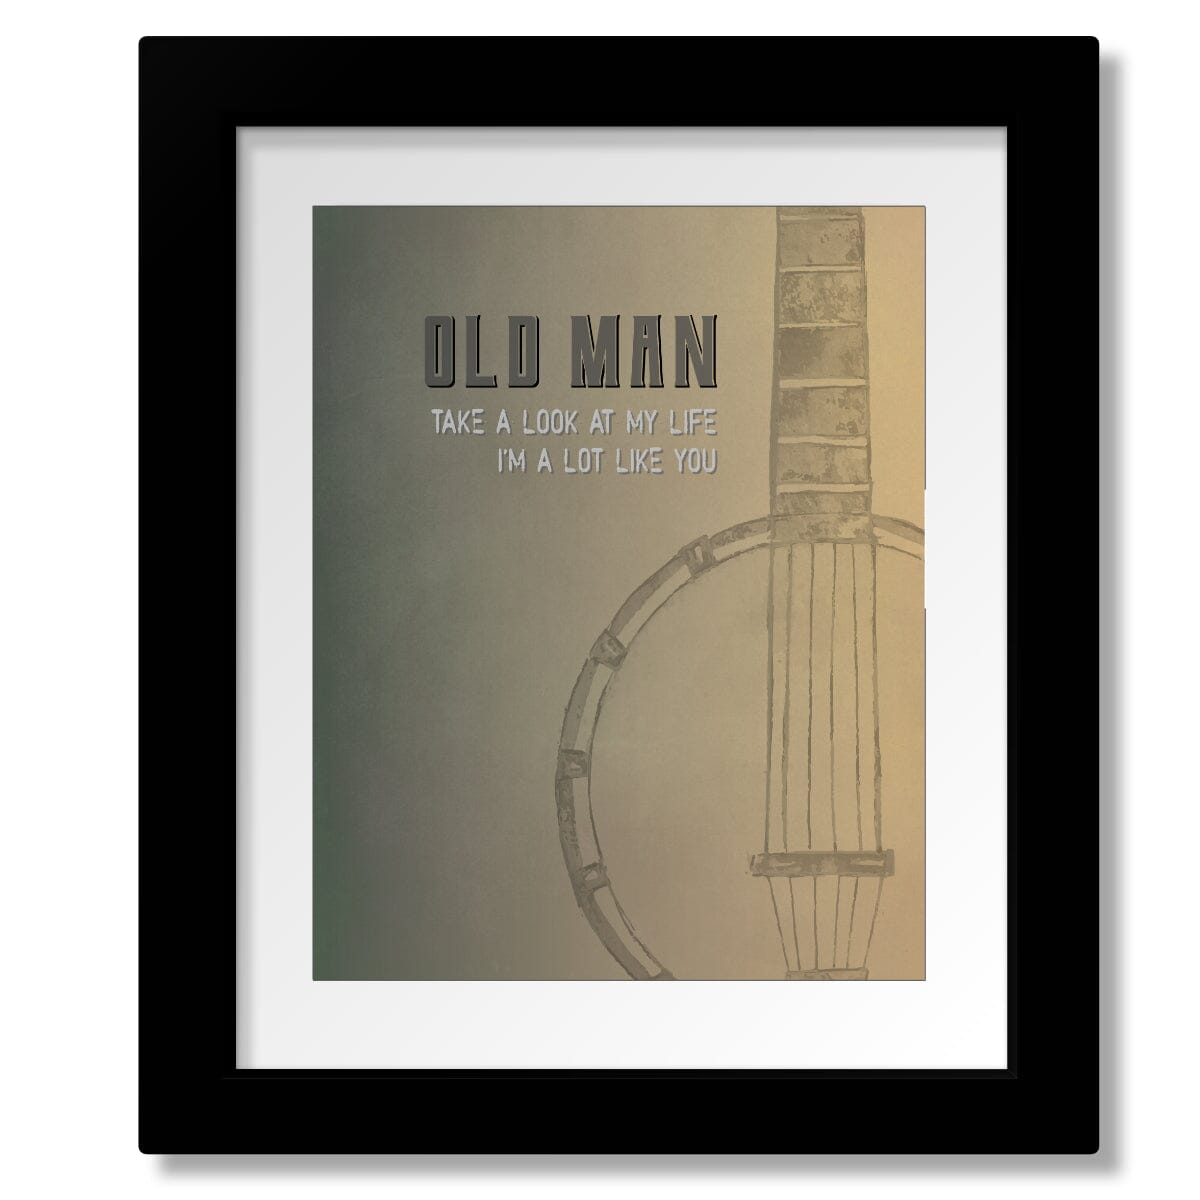 Old Man by Neil Young - Lyric Inspired Classic Rock Print Song Lyrics Art Song Lyrics Art 8x10 Matted and Framed Print 